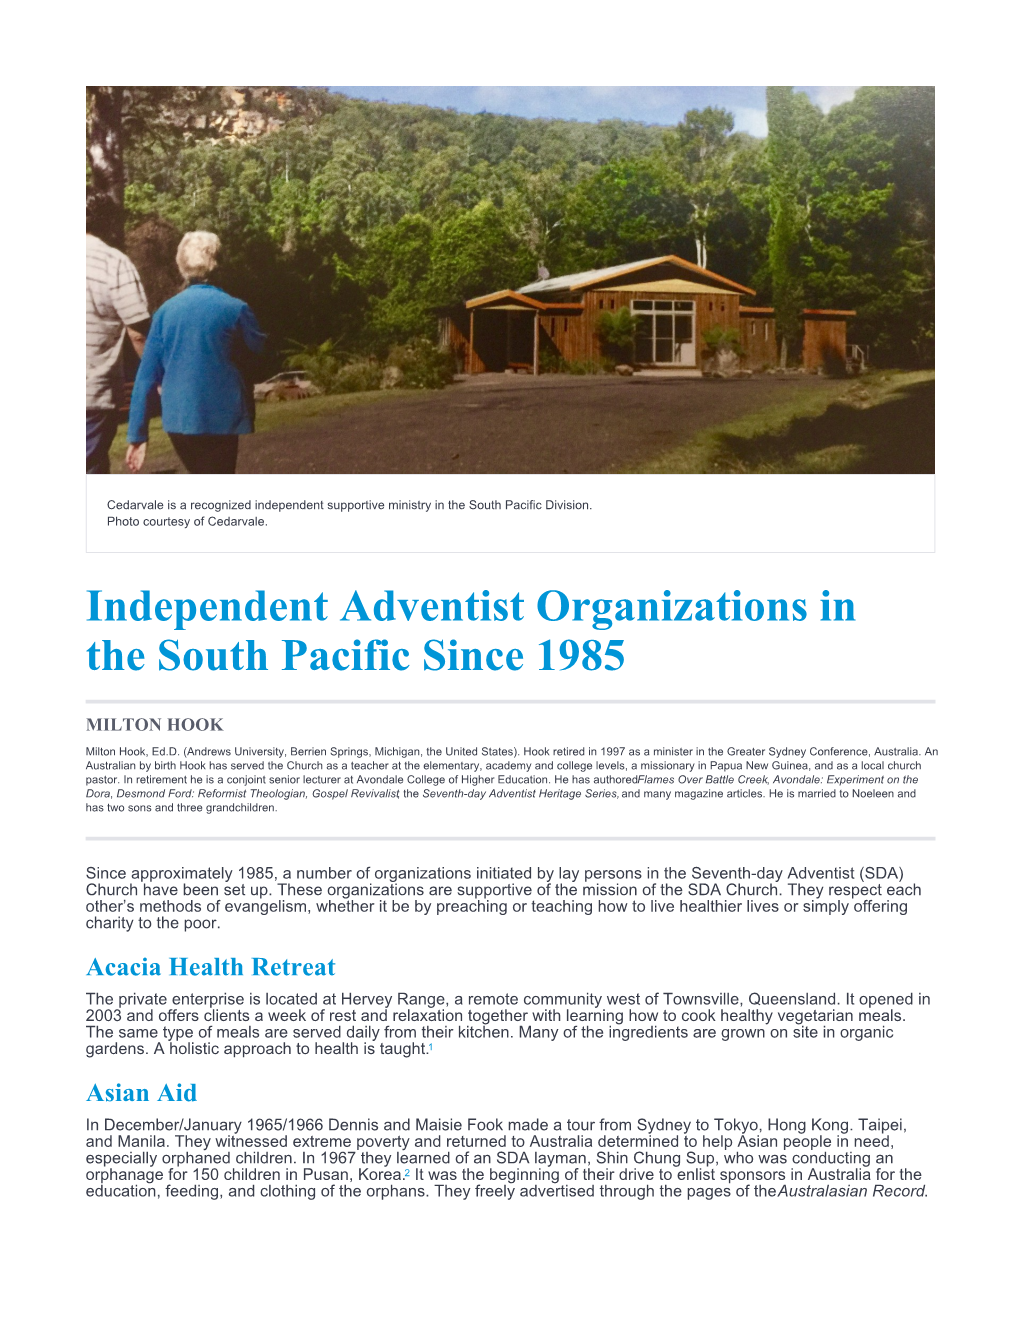 Independent Adventist Organizations in the South Pacific Since 1985